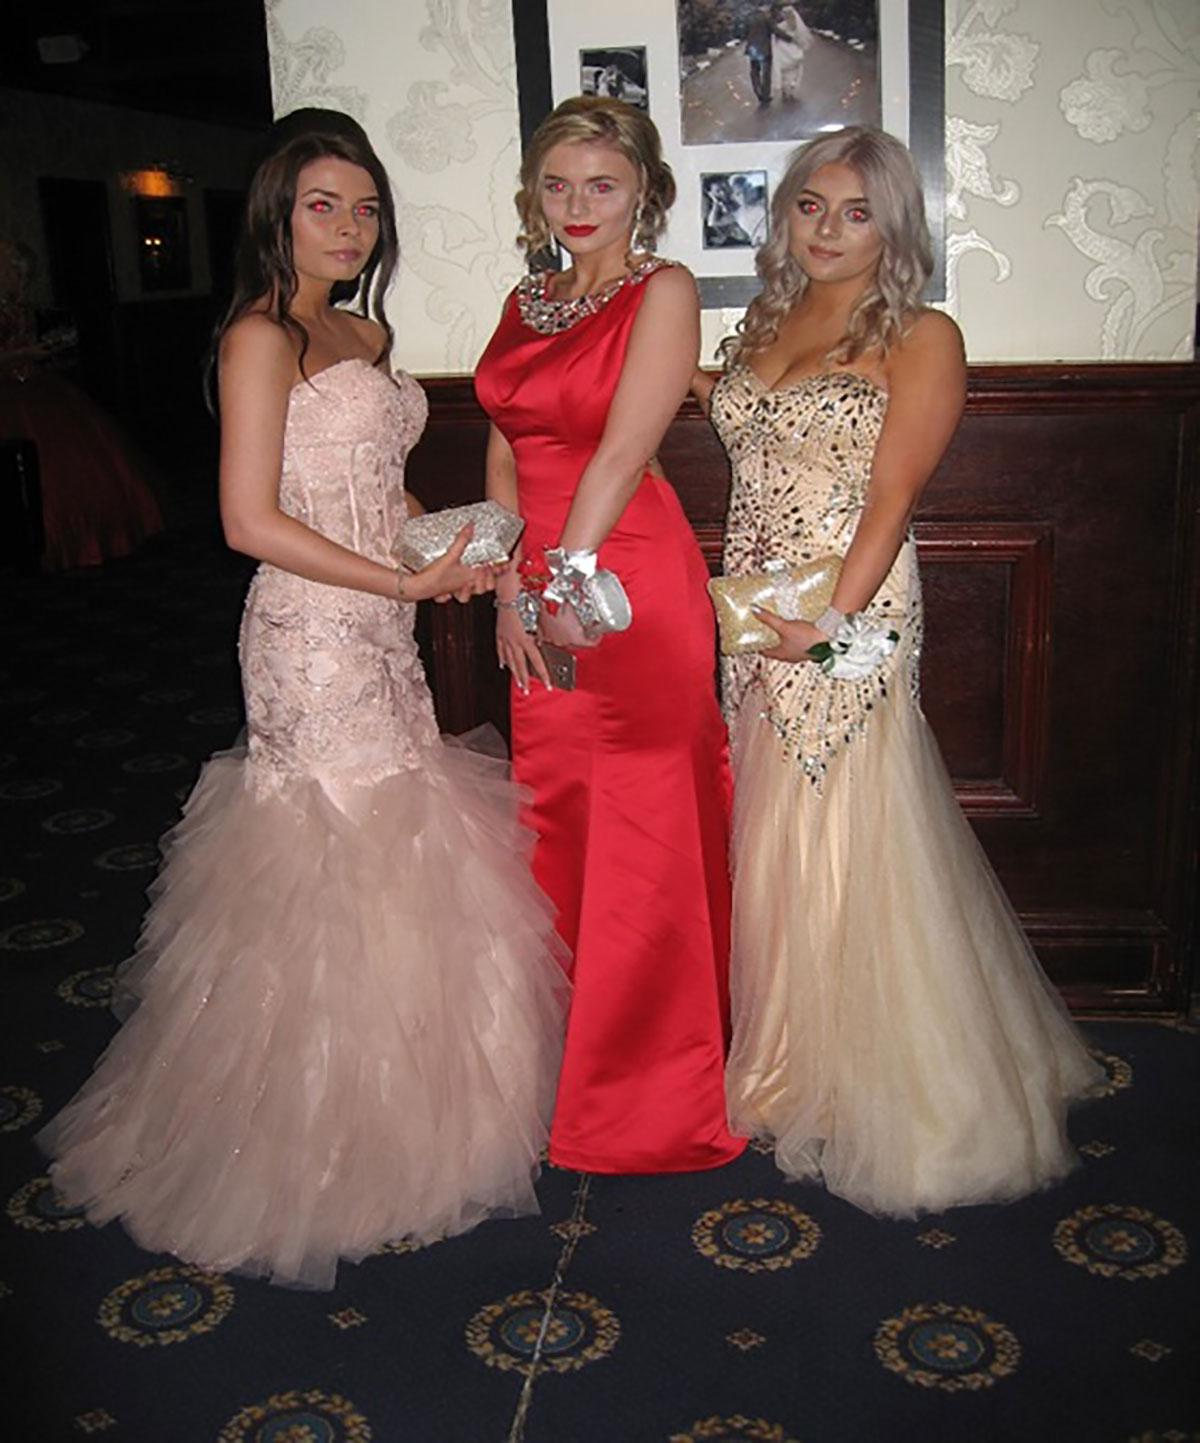 Ebbw Fawr:  From left to right: Katie Chivers, Abigail Stevens, Shannon Evans.